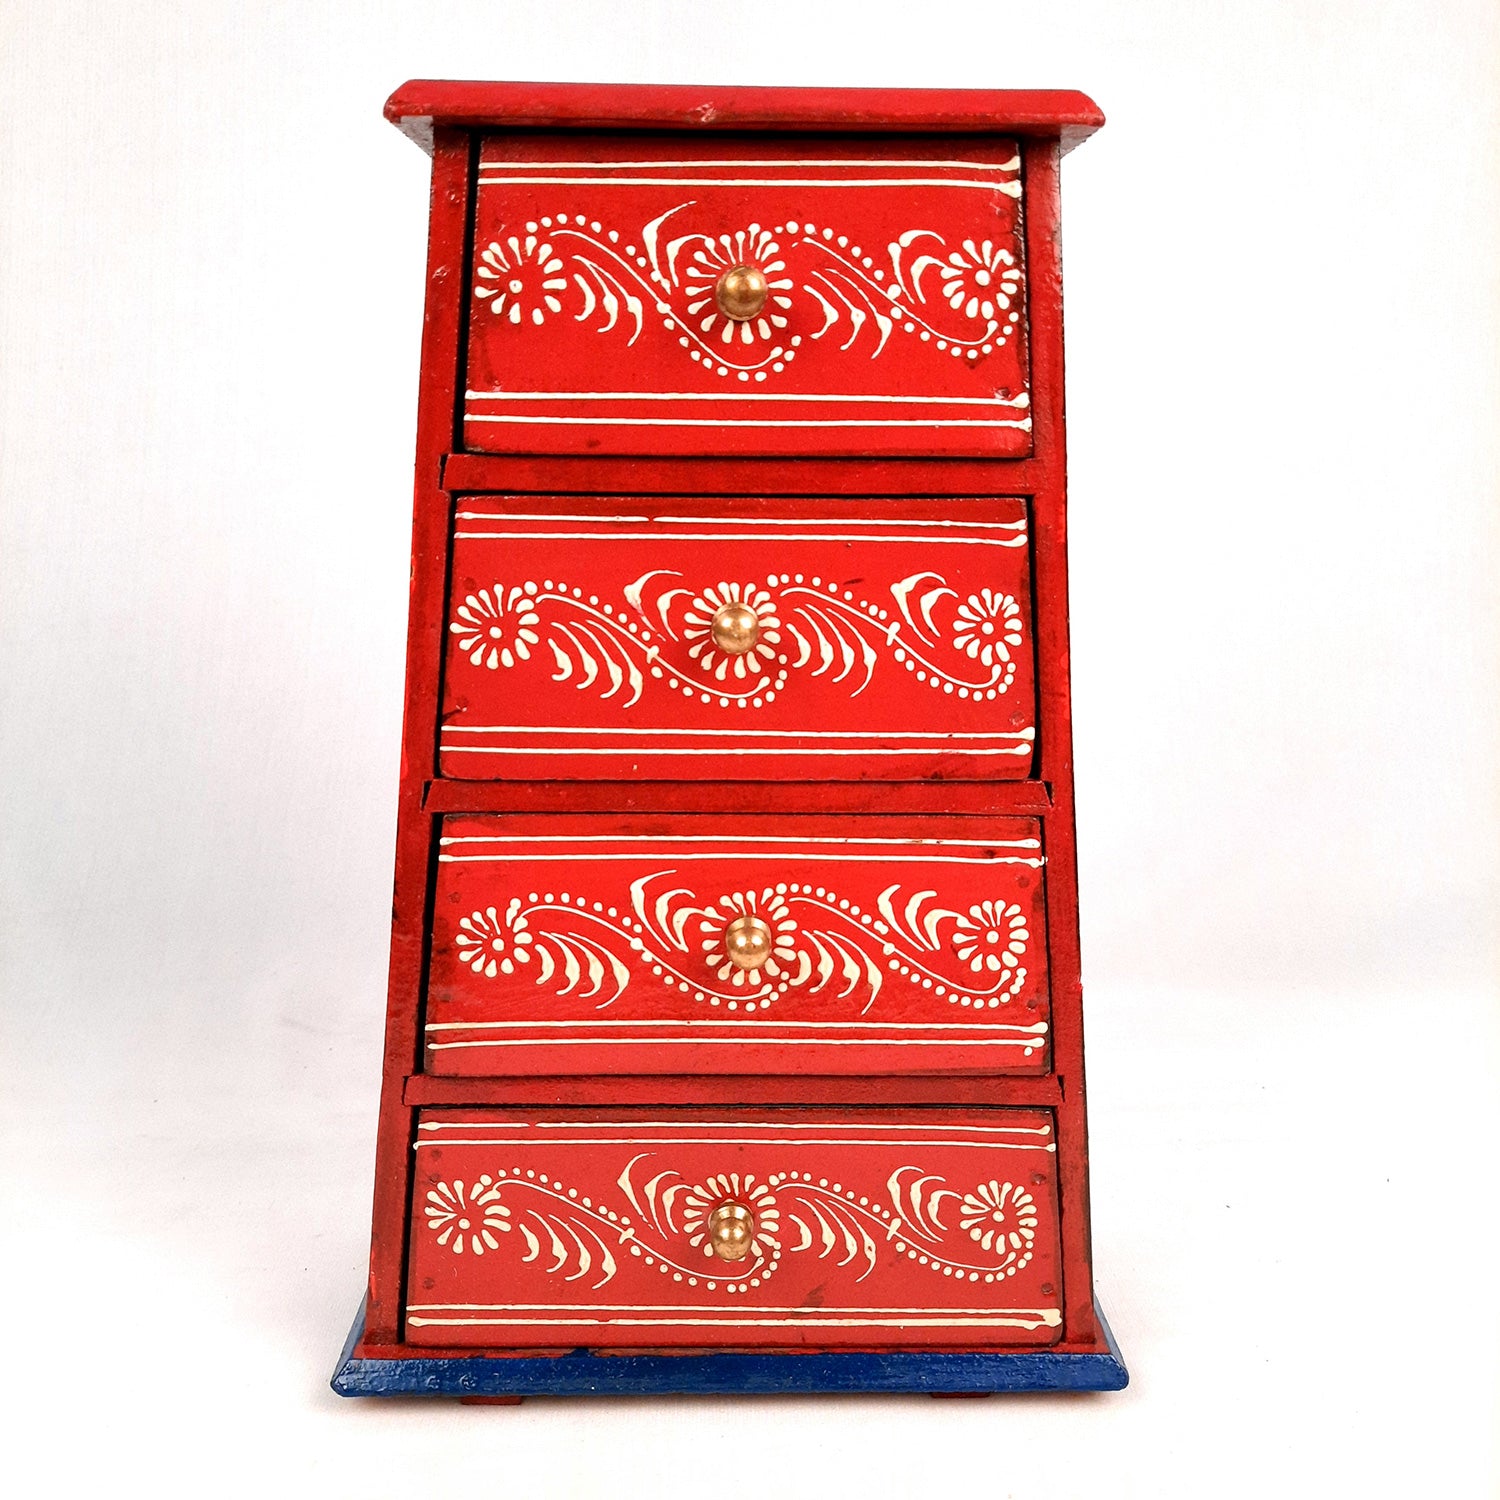 Jewellery Box | Decorative Wooden Jewelry Box - For Earring, Necklace & Gifts - 11 Inch - Apkamart